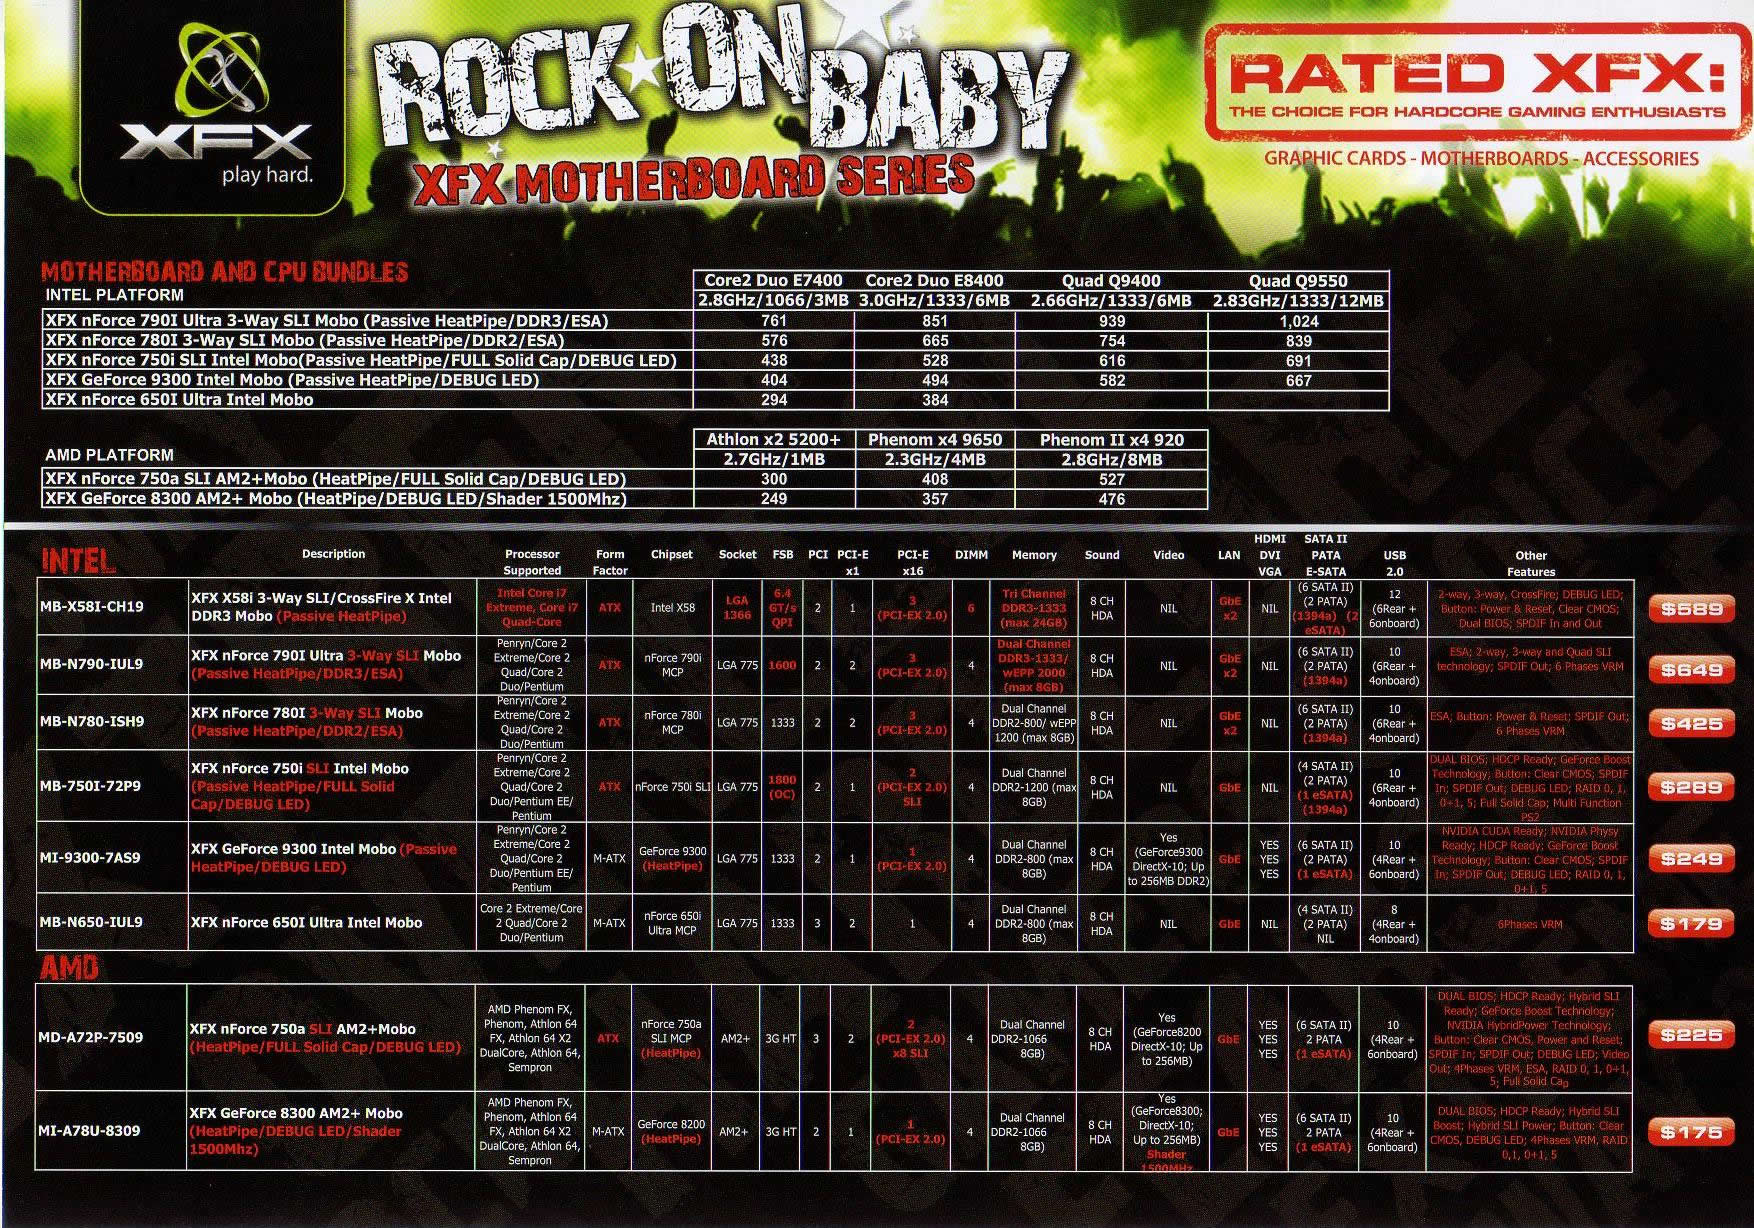 IT Show 2009 price list image brochure of XFX Motherboards (coldfreeze)